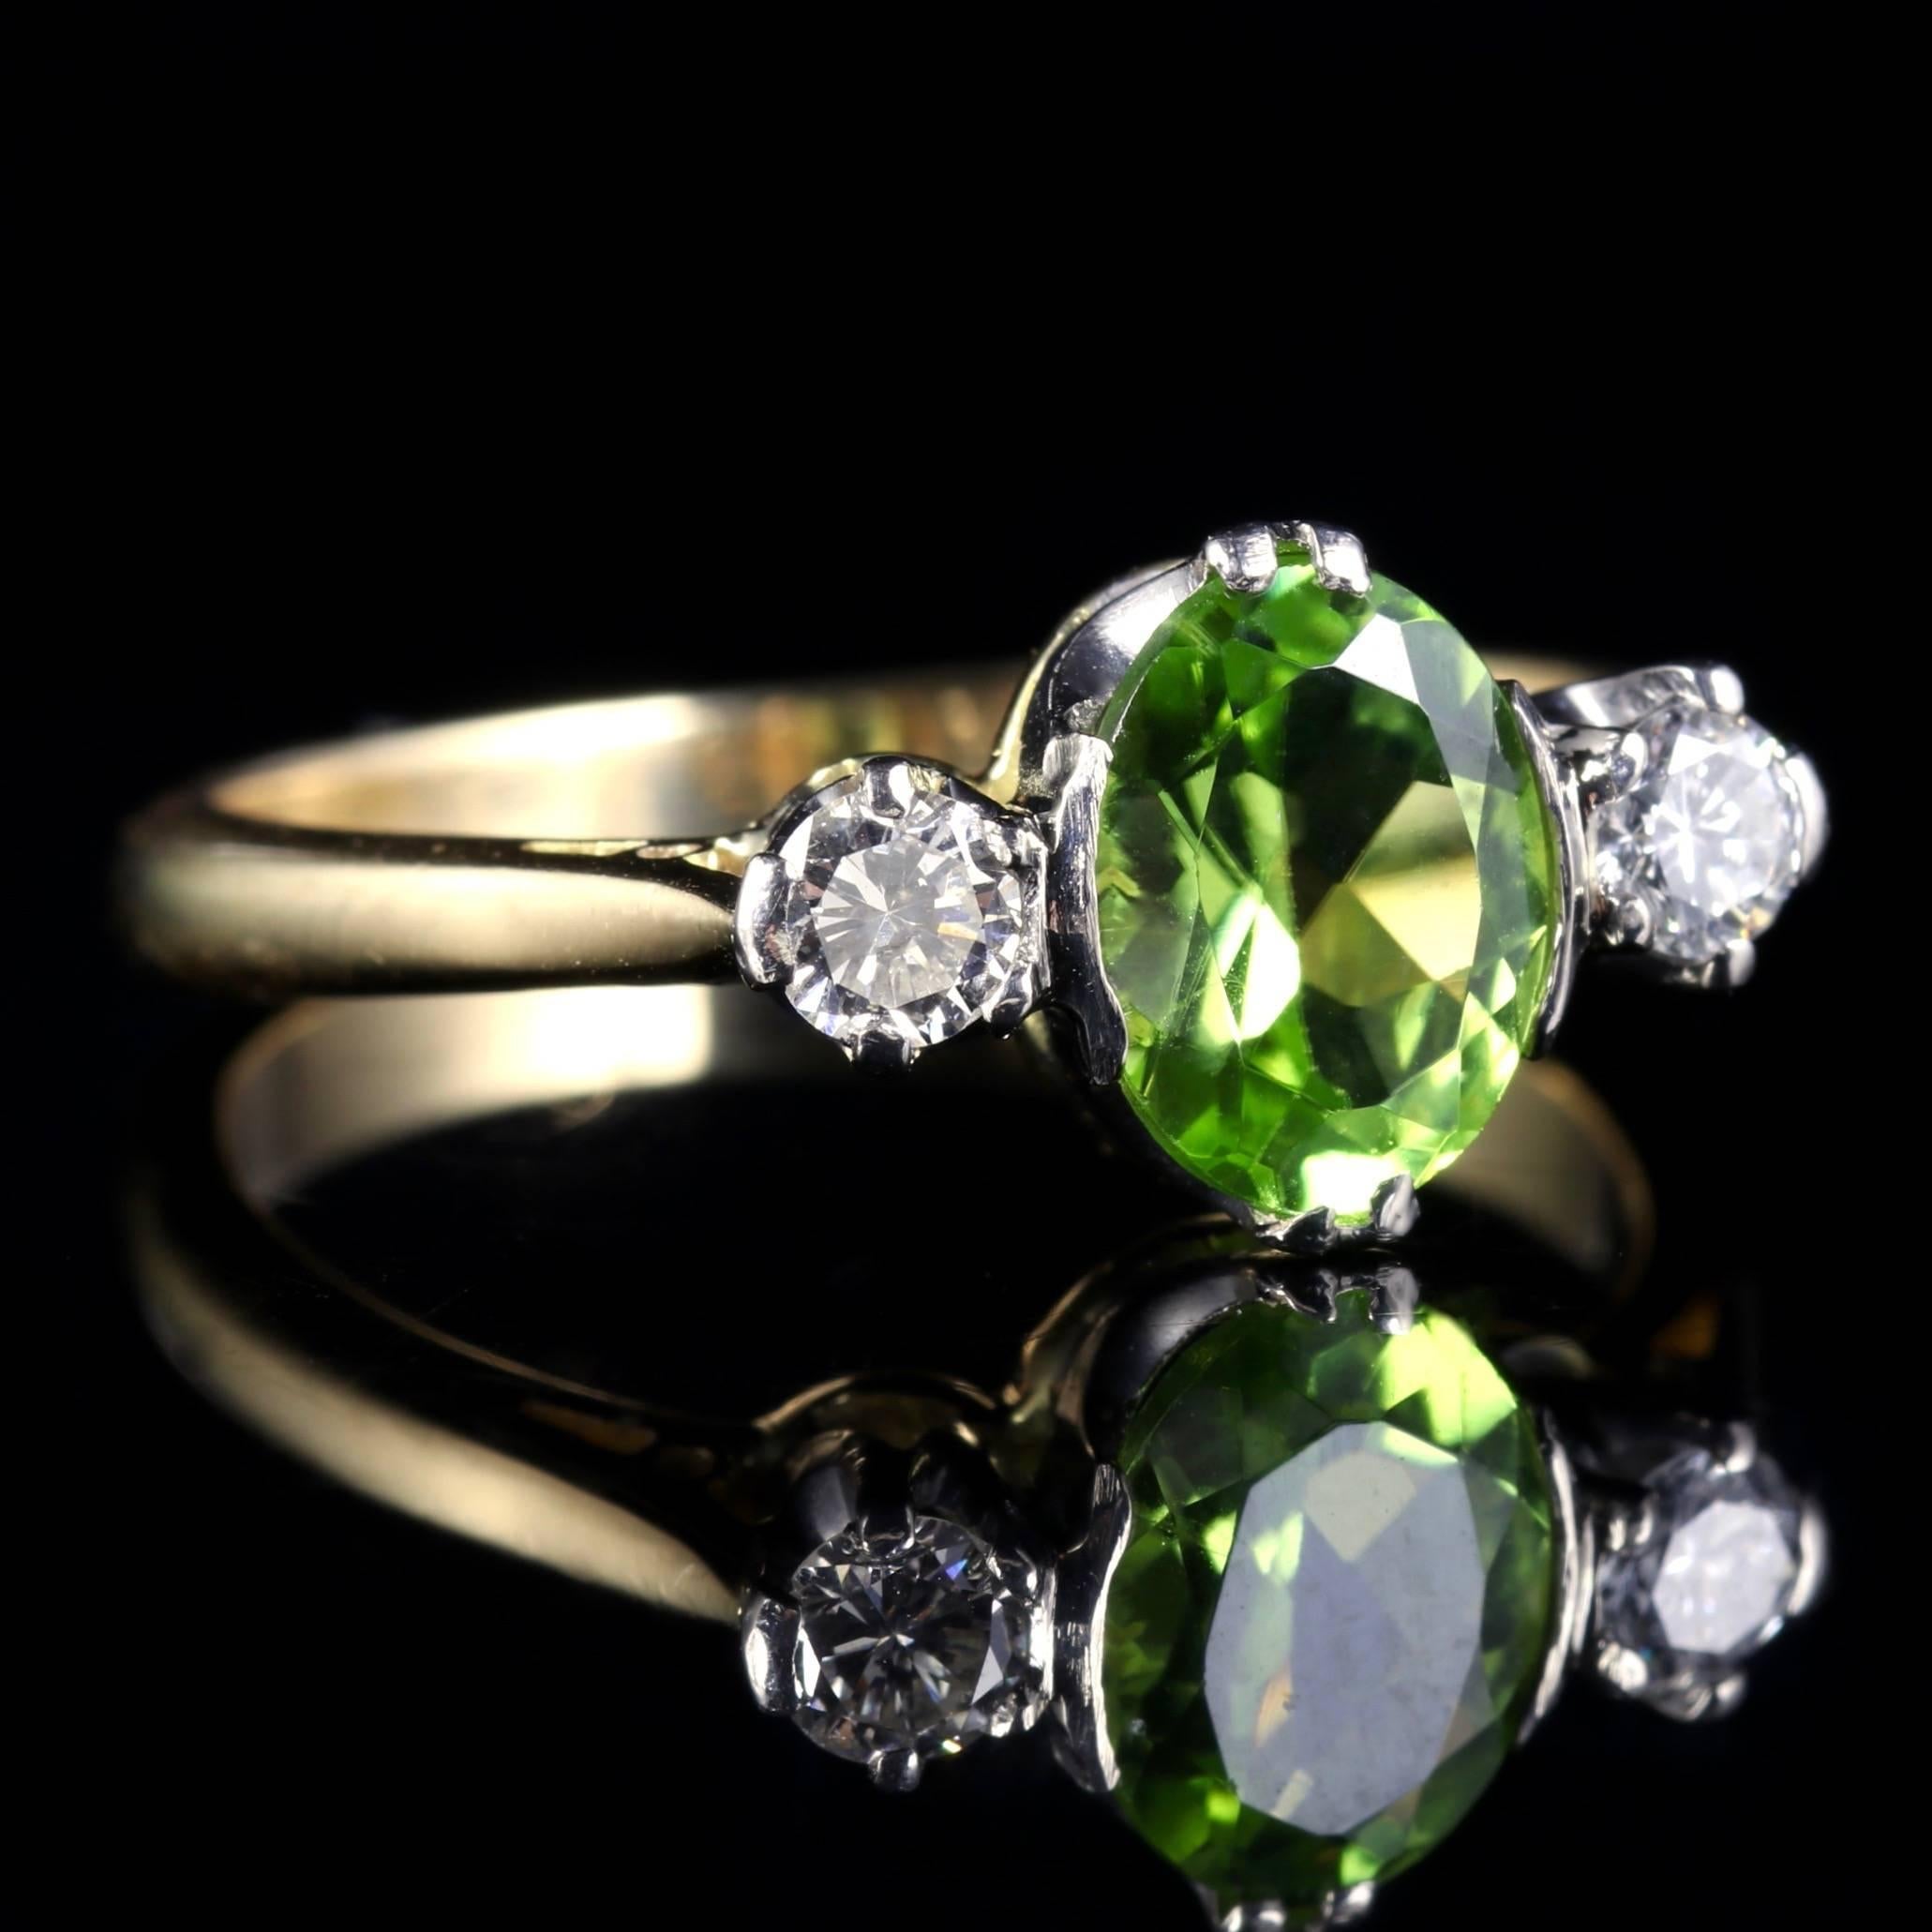 This fabulous 18ct Yellow Gold Victorian Diamond and Peridot trilogy ring is Circa 1900.

The central green Peridot measures 1.50ct with a charming Diamond either side.

The ring displays superb quality workmanship from the Victorian period.

The